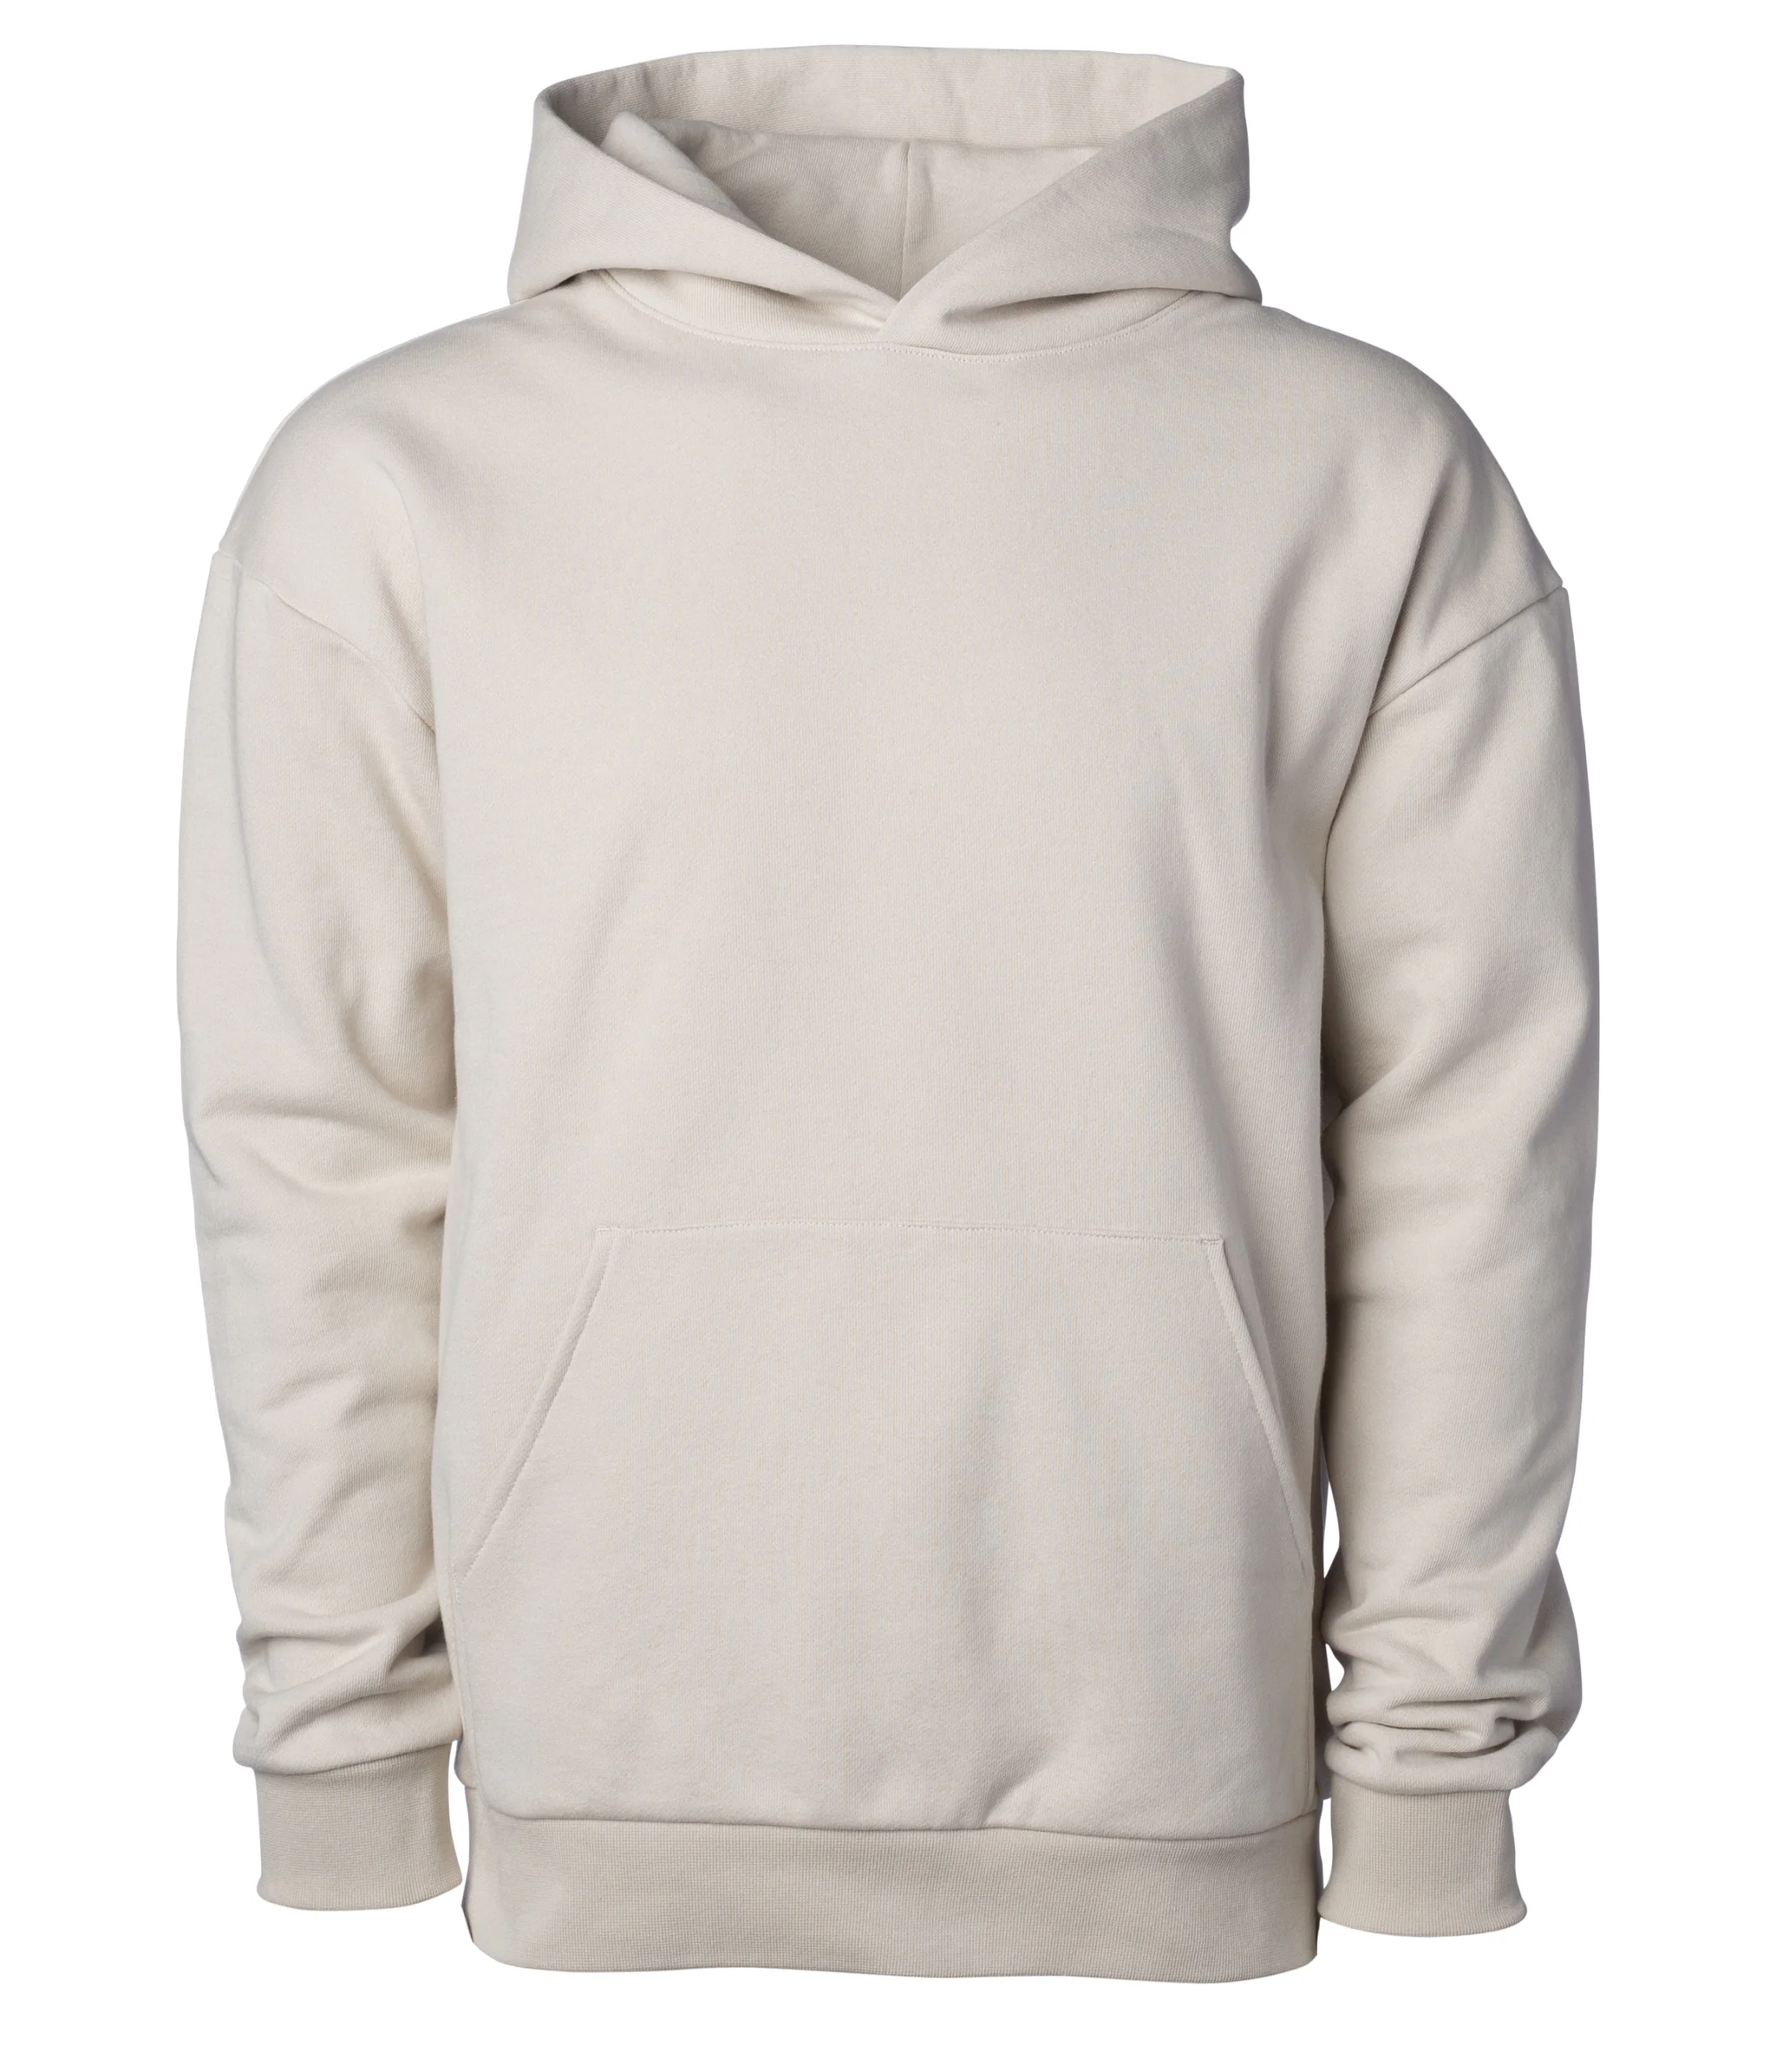 Back view of a plain beige hoodie with a hood and a front pouch pocket, displayed against a white background.